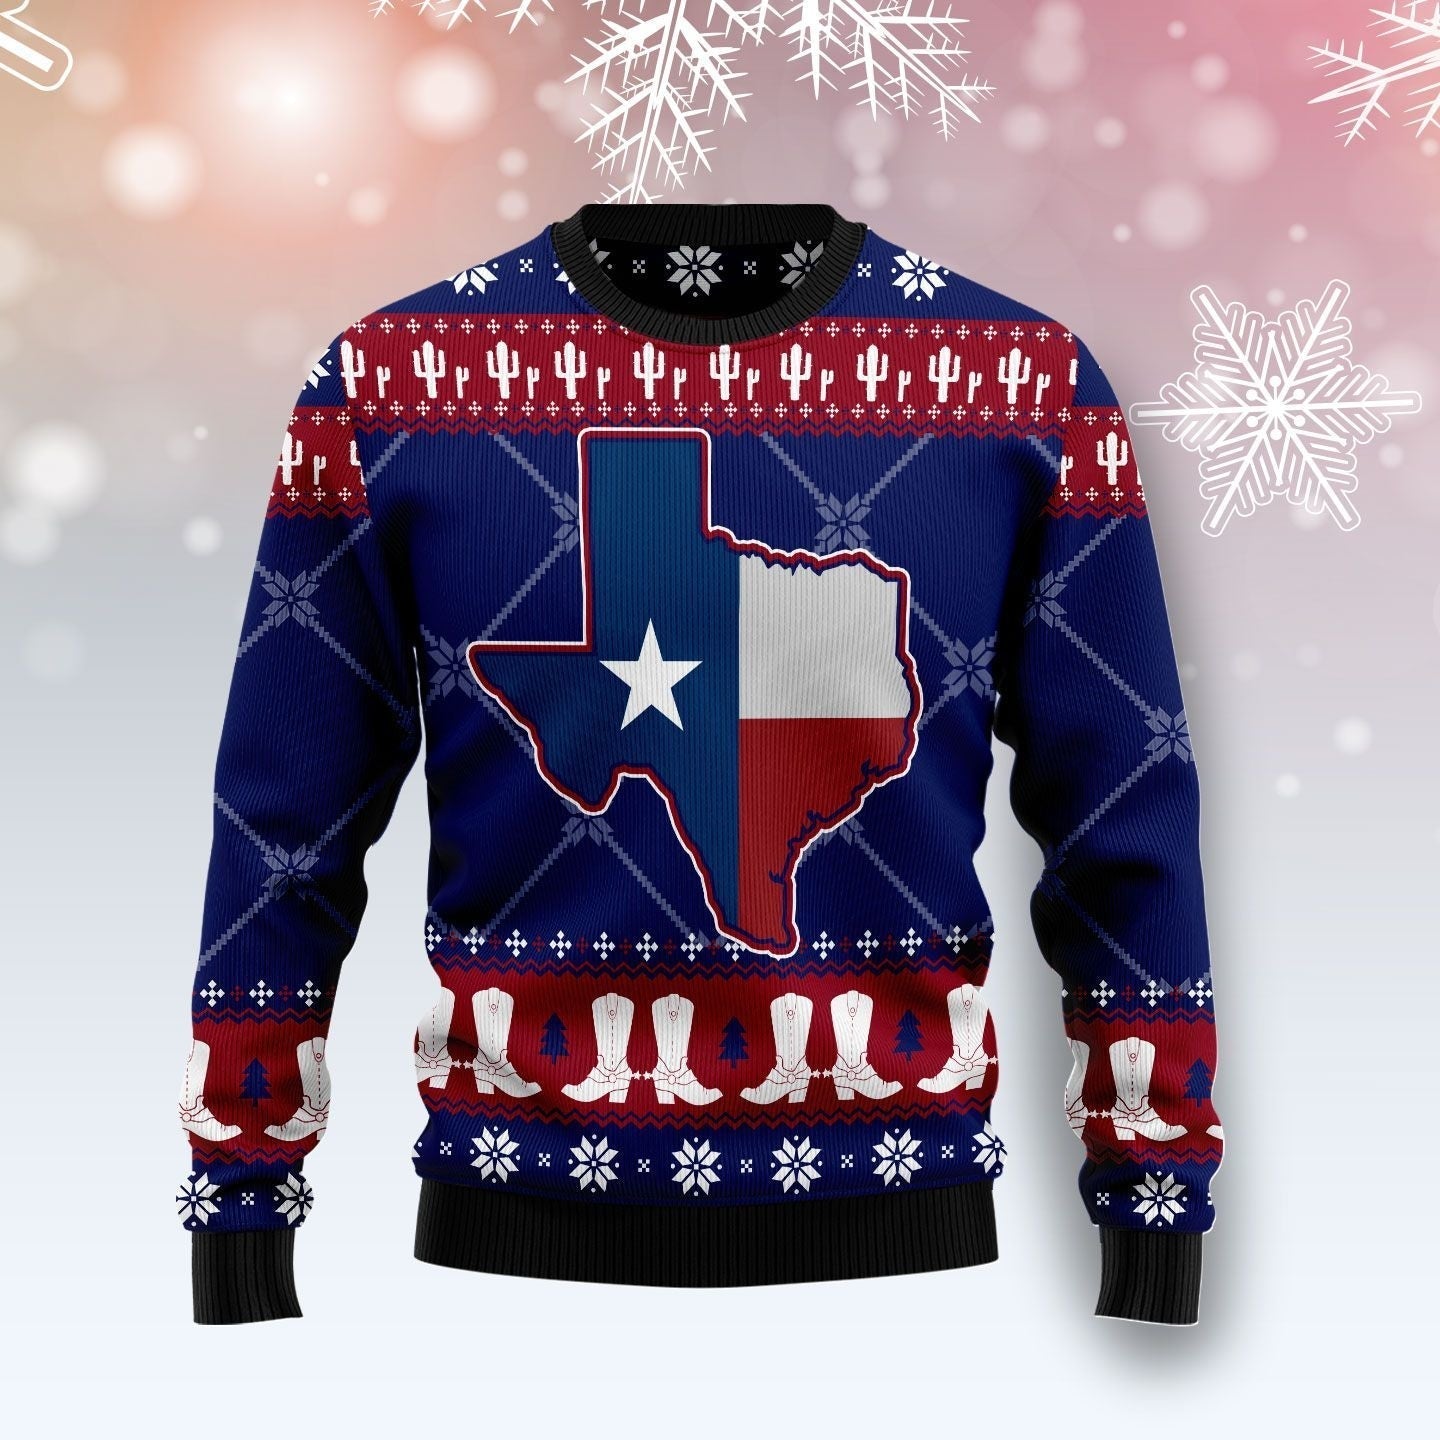 Texas Map And Cowboy Boots Pattern Ugly Christmas Sweater, Perfect Outfit For Christmas, Winter, New Year Of Texas Lovers